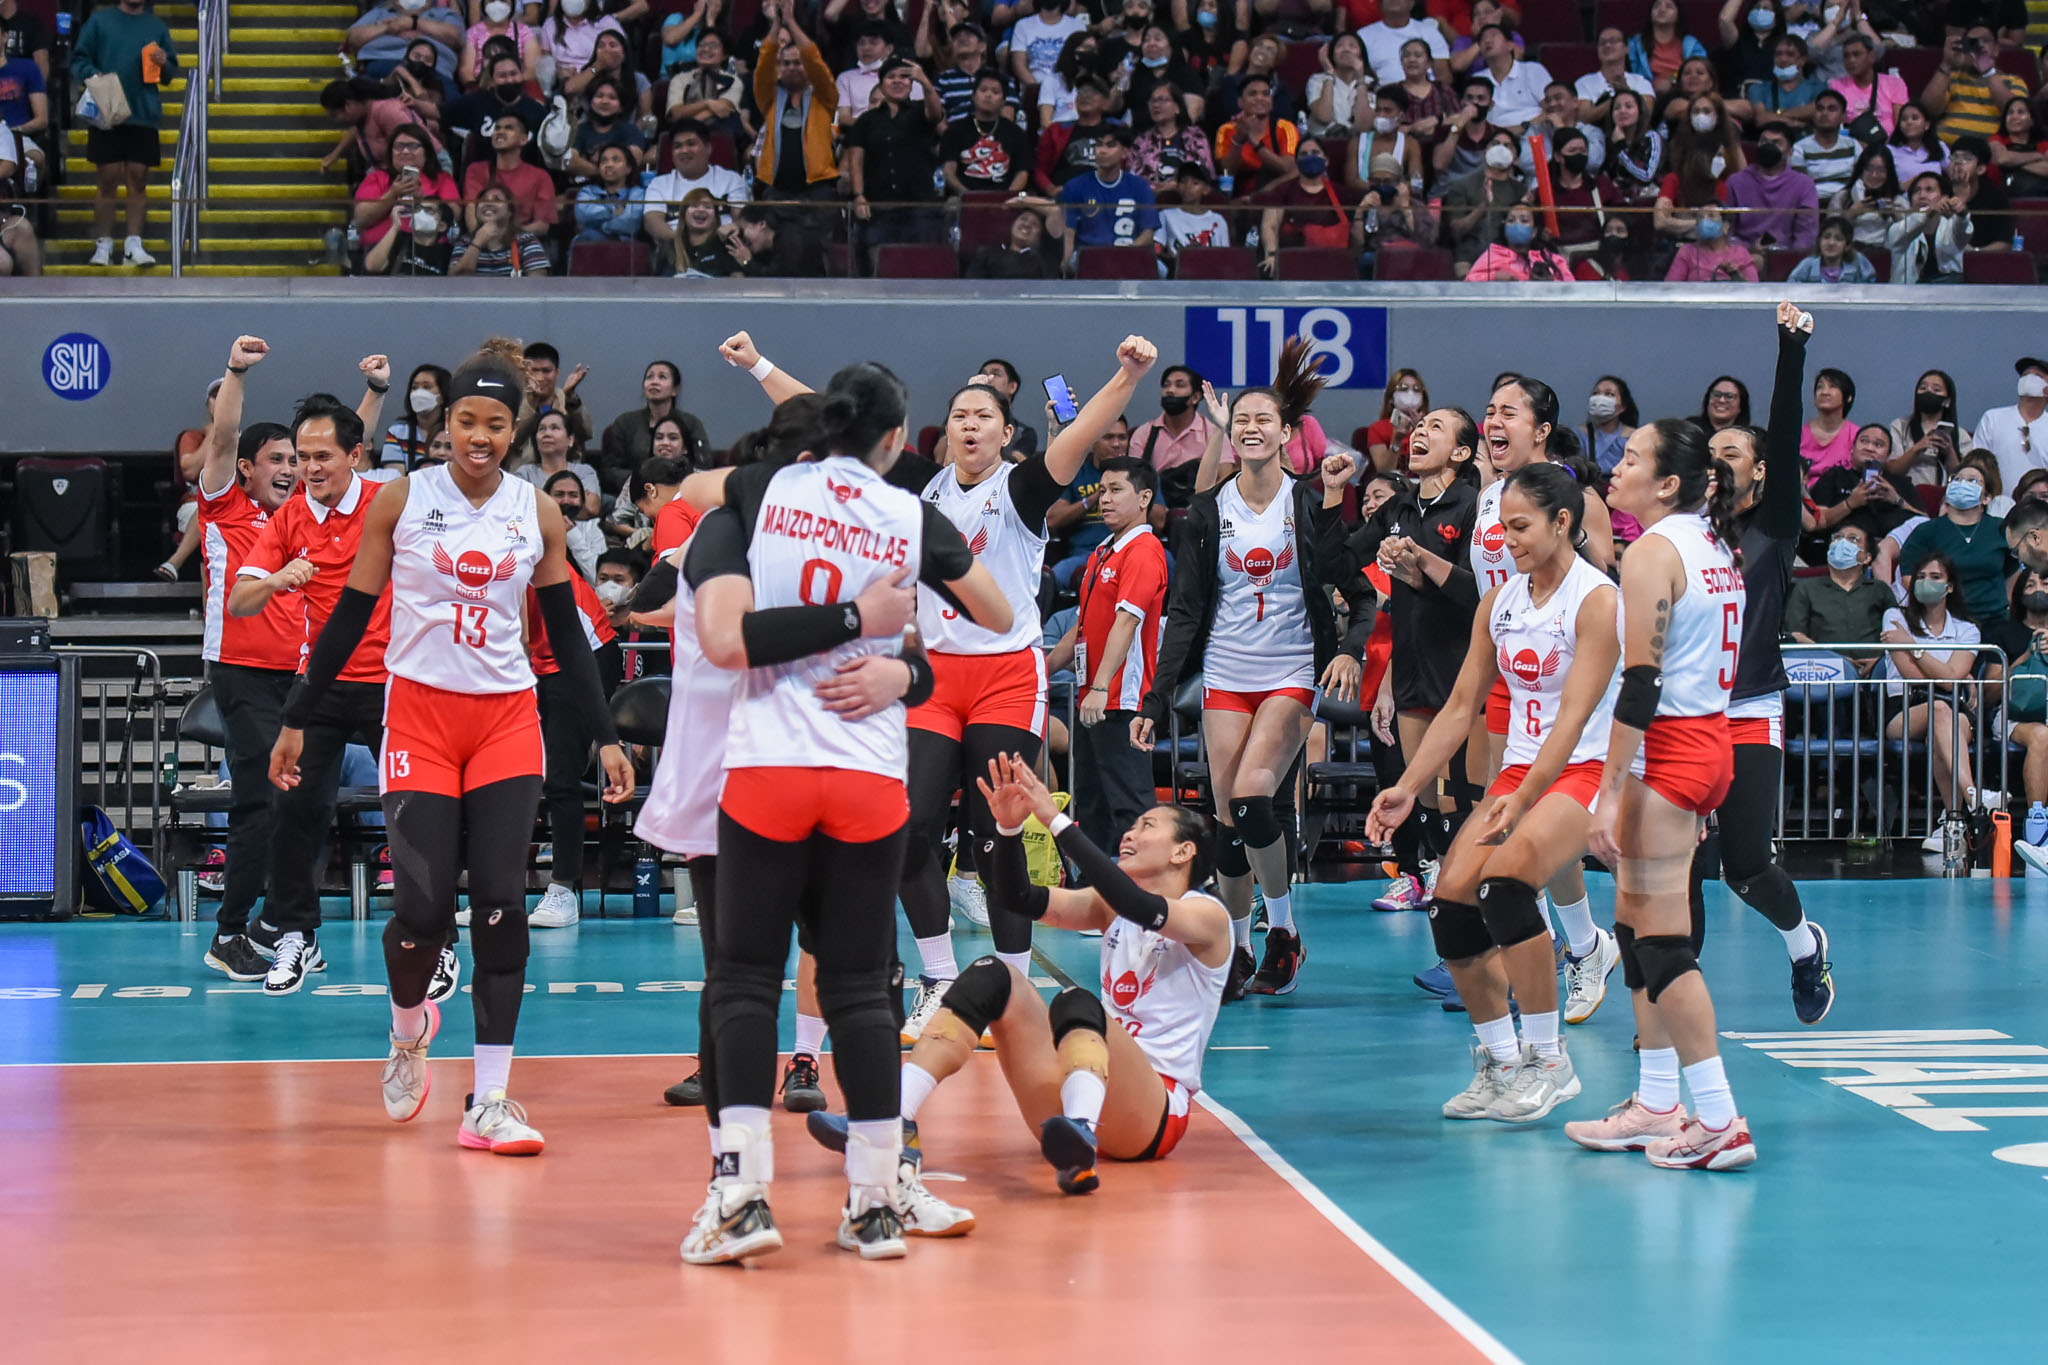 PVL-2023-Finals-Creamline-vs.-Petrogazz-0782 Though challenge call was successful, Almadro wants Petro Gazz to decide own fate News PVL Volleyball  - philippine sports news